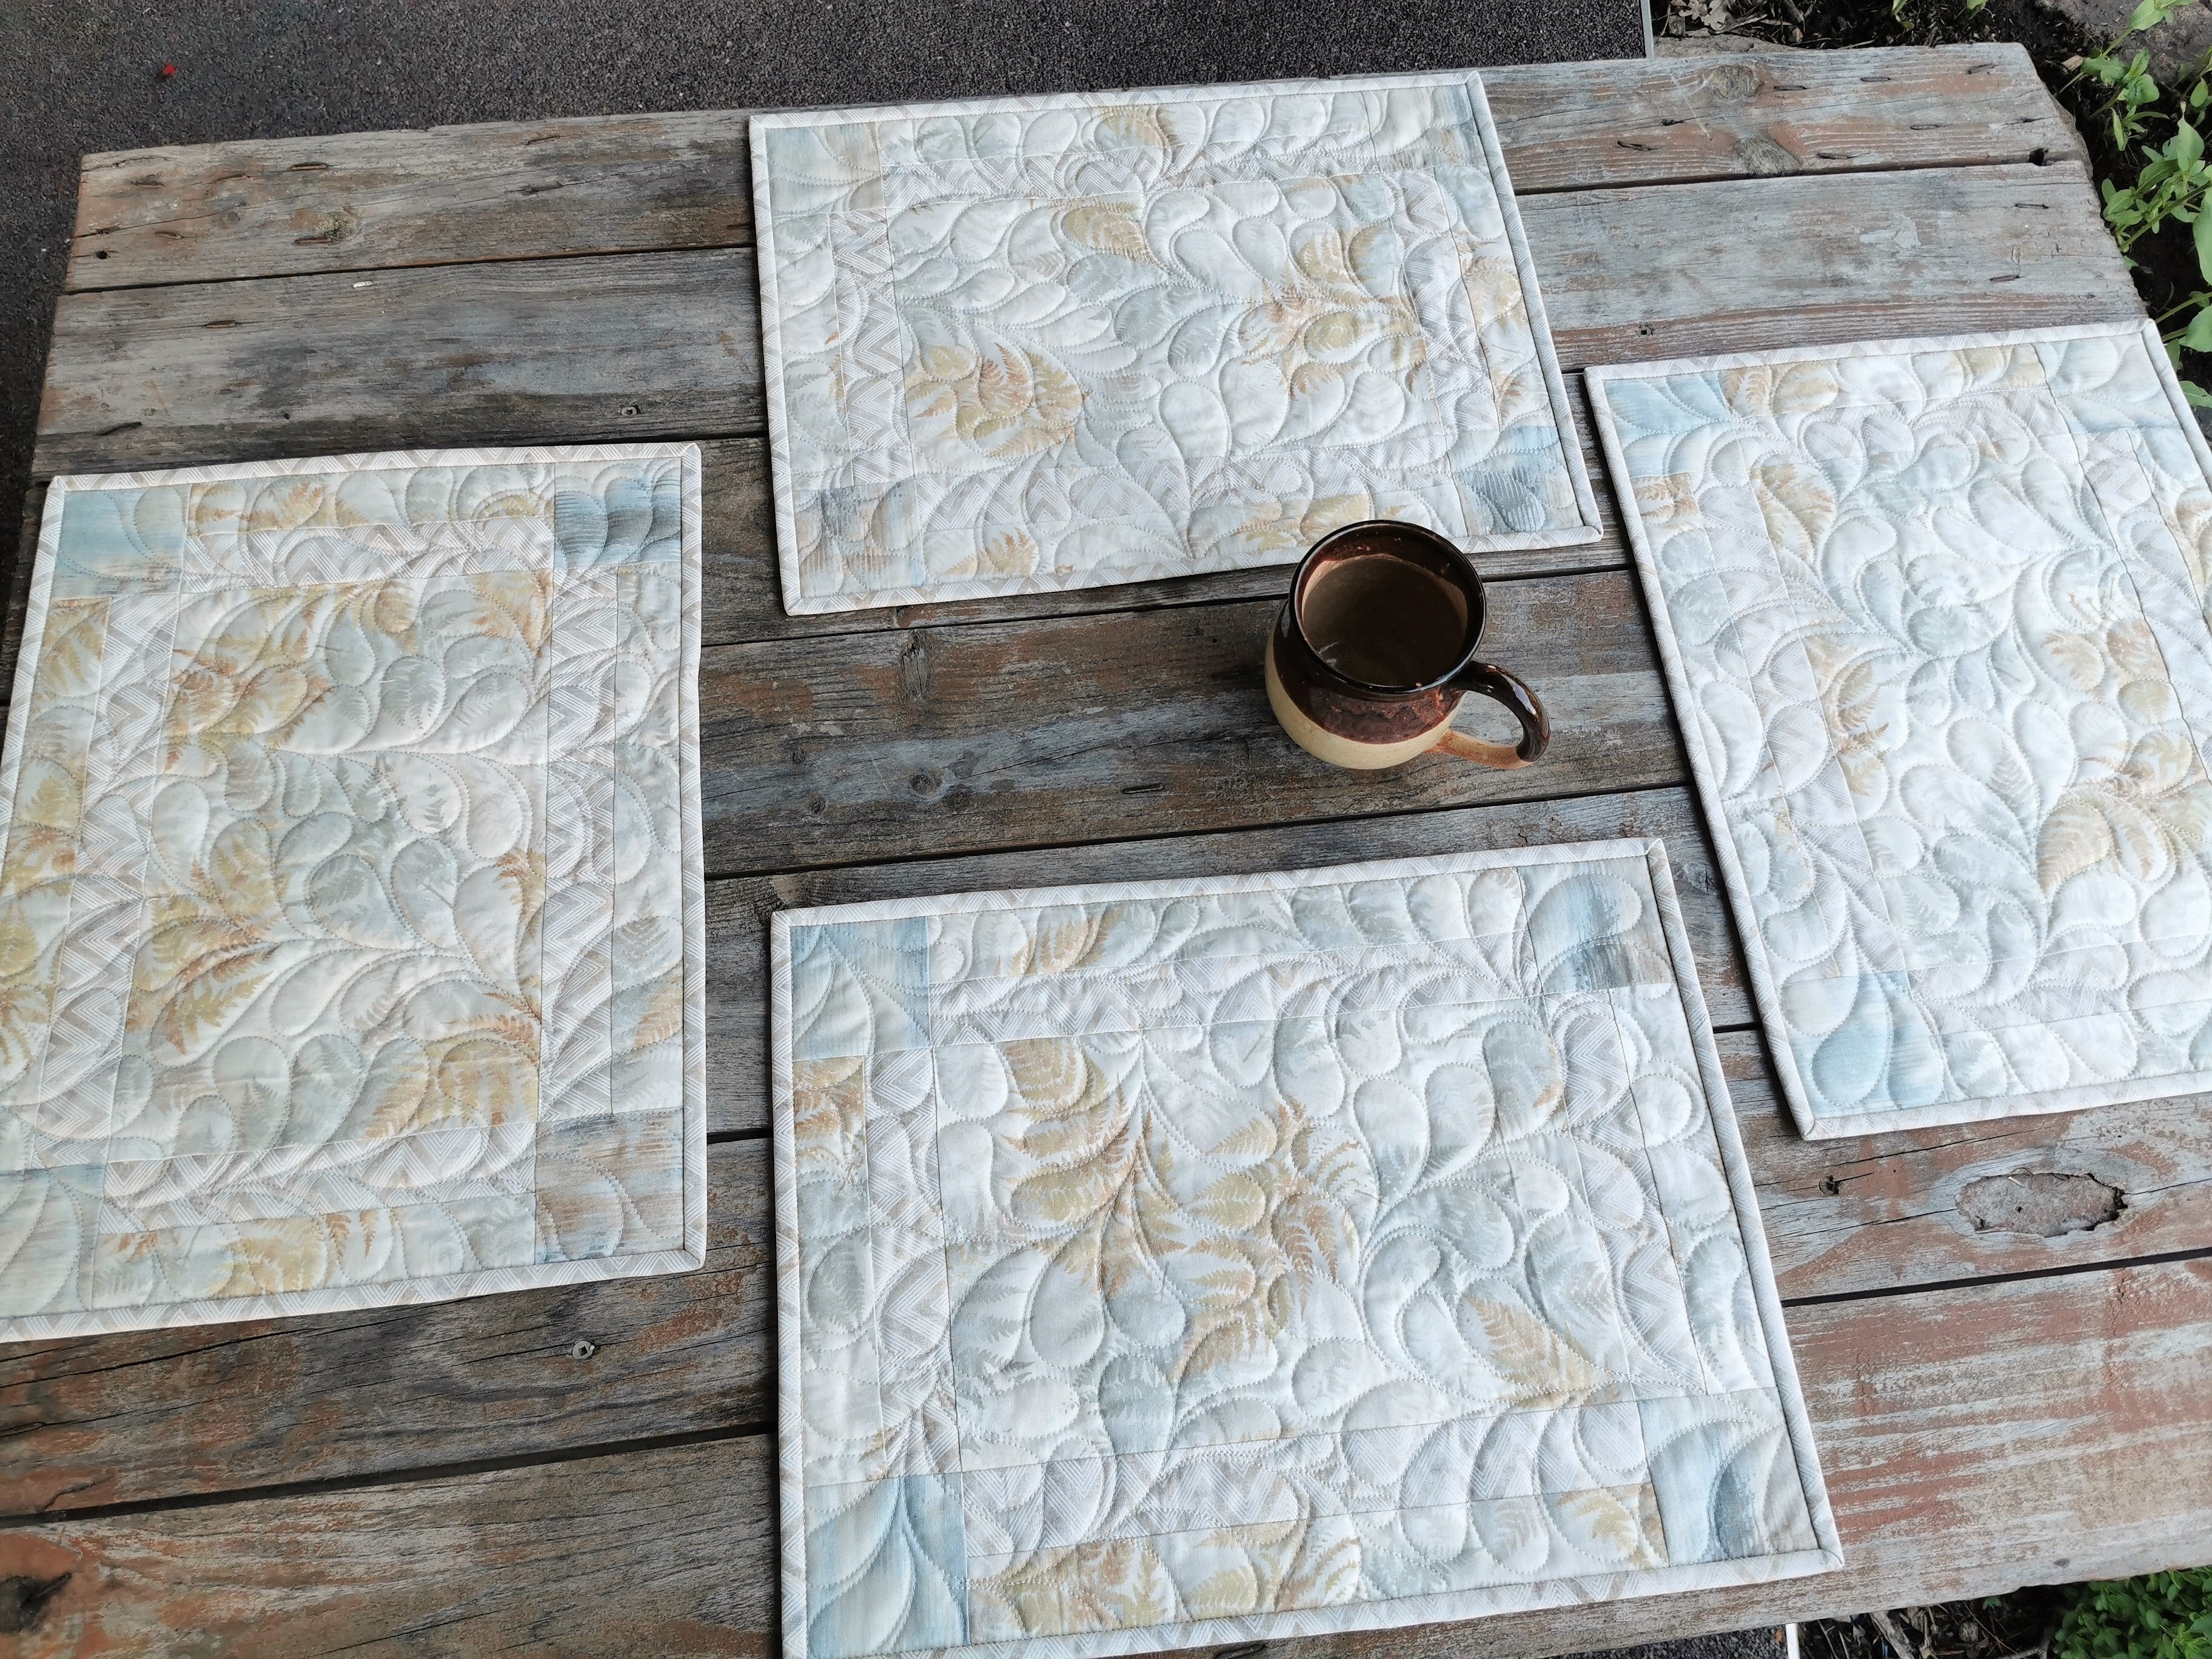 The four quilted placemats are shown on a small table , laid out individually. Feather quilting is visable showing texture.